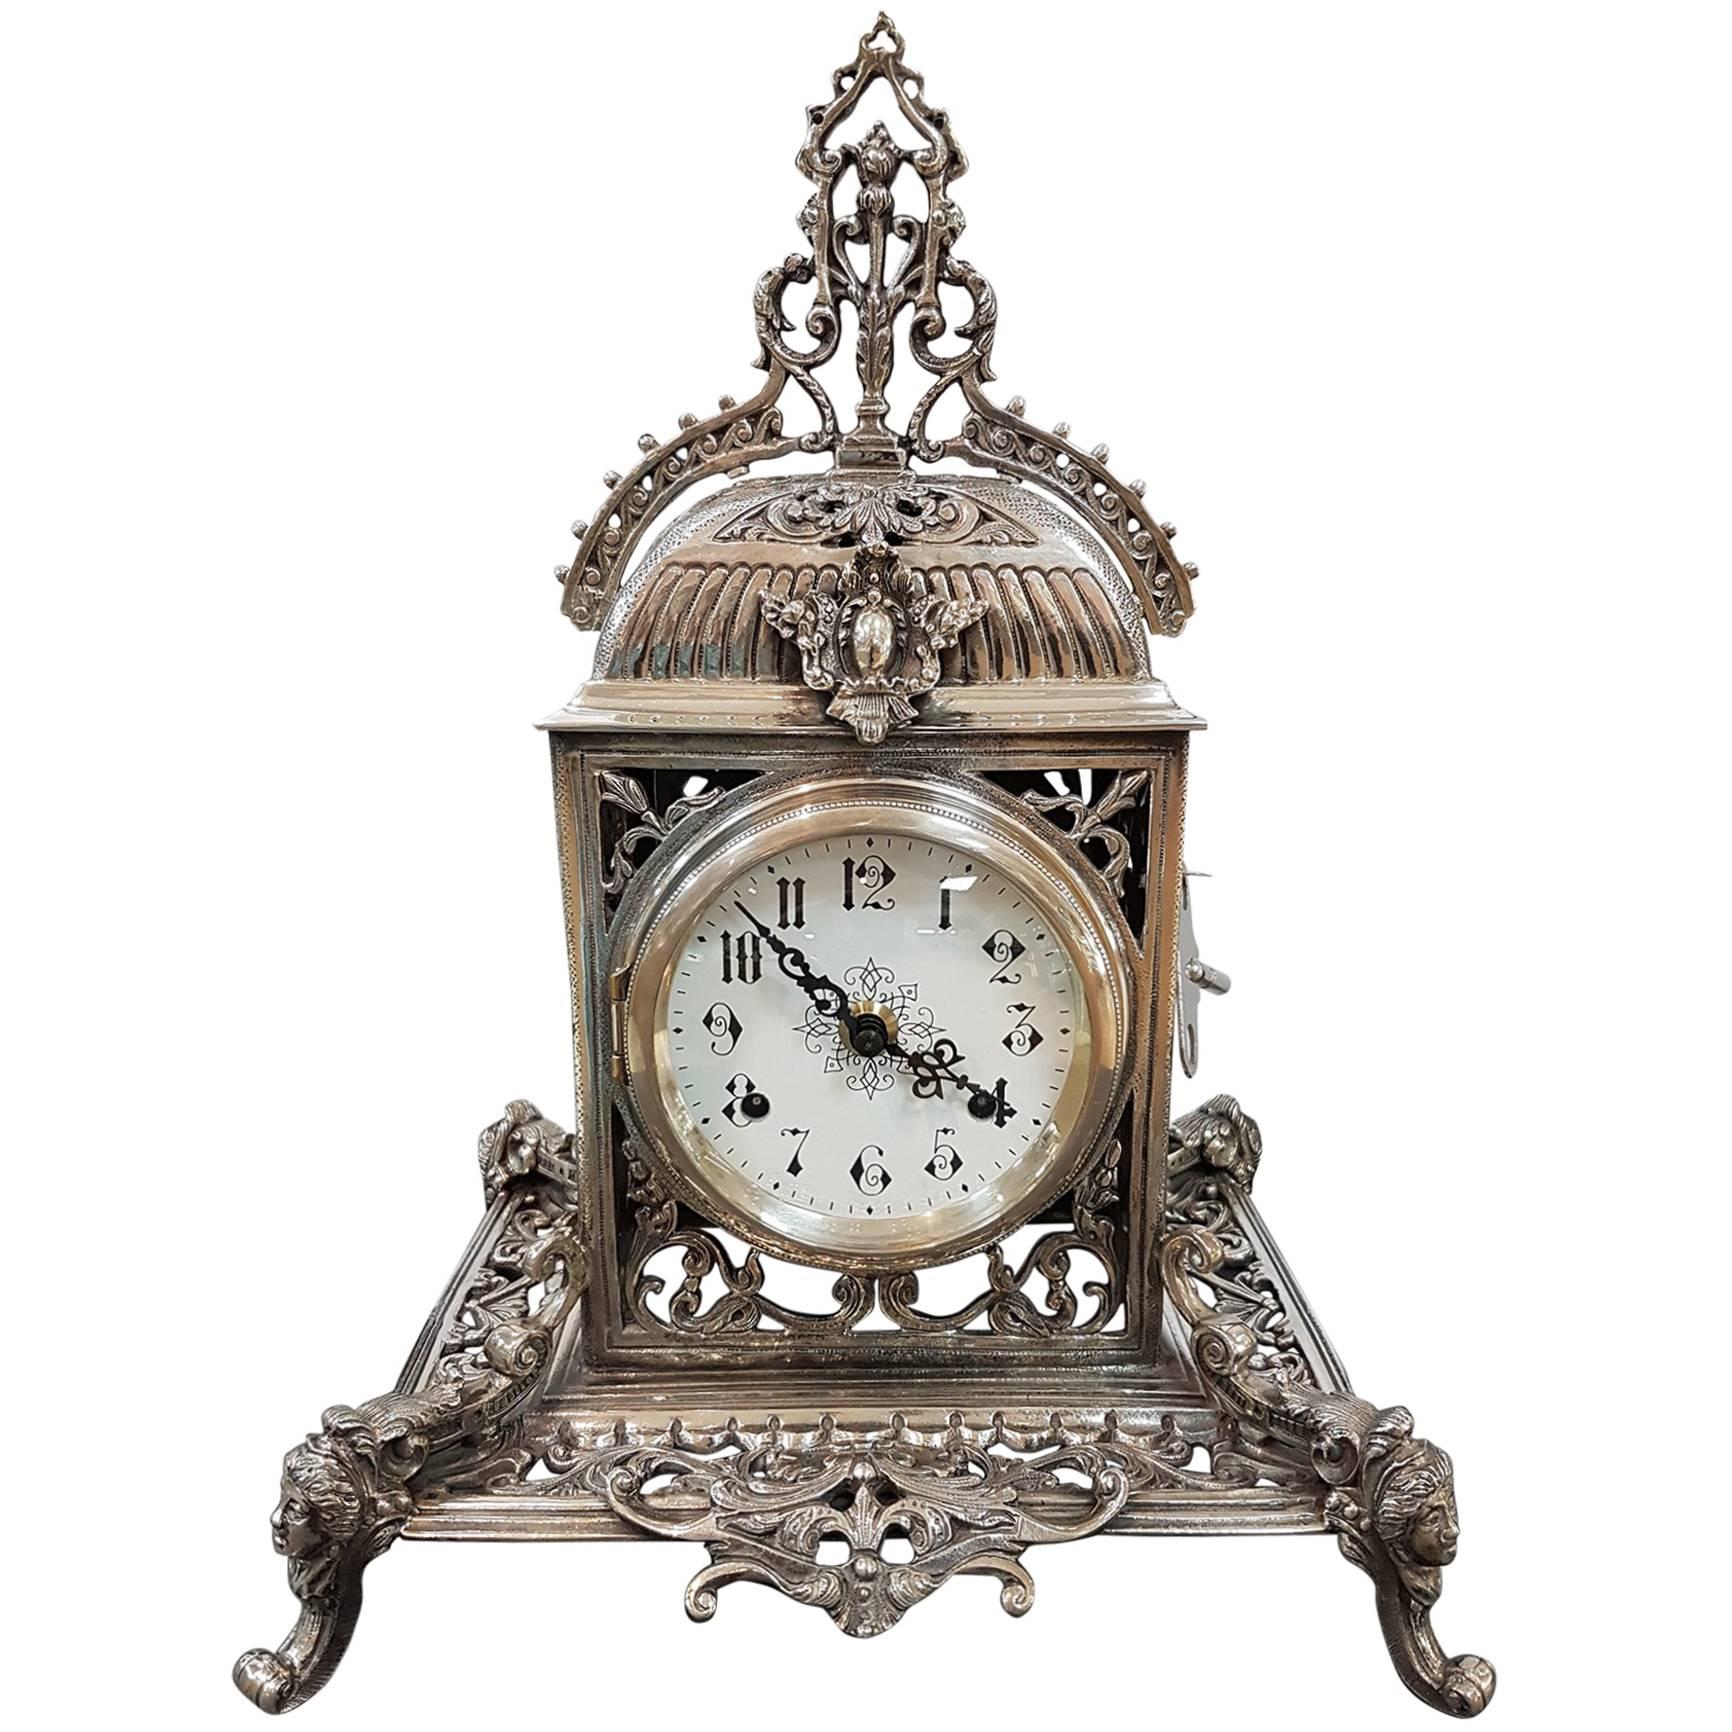 20th Century Italian Silver Gothic revival Table Clock. Casting and chisel